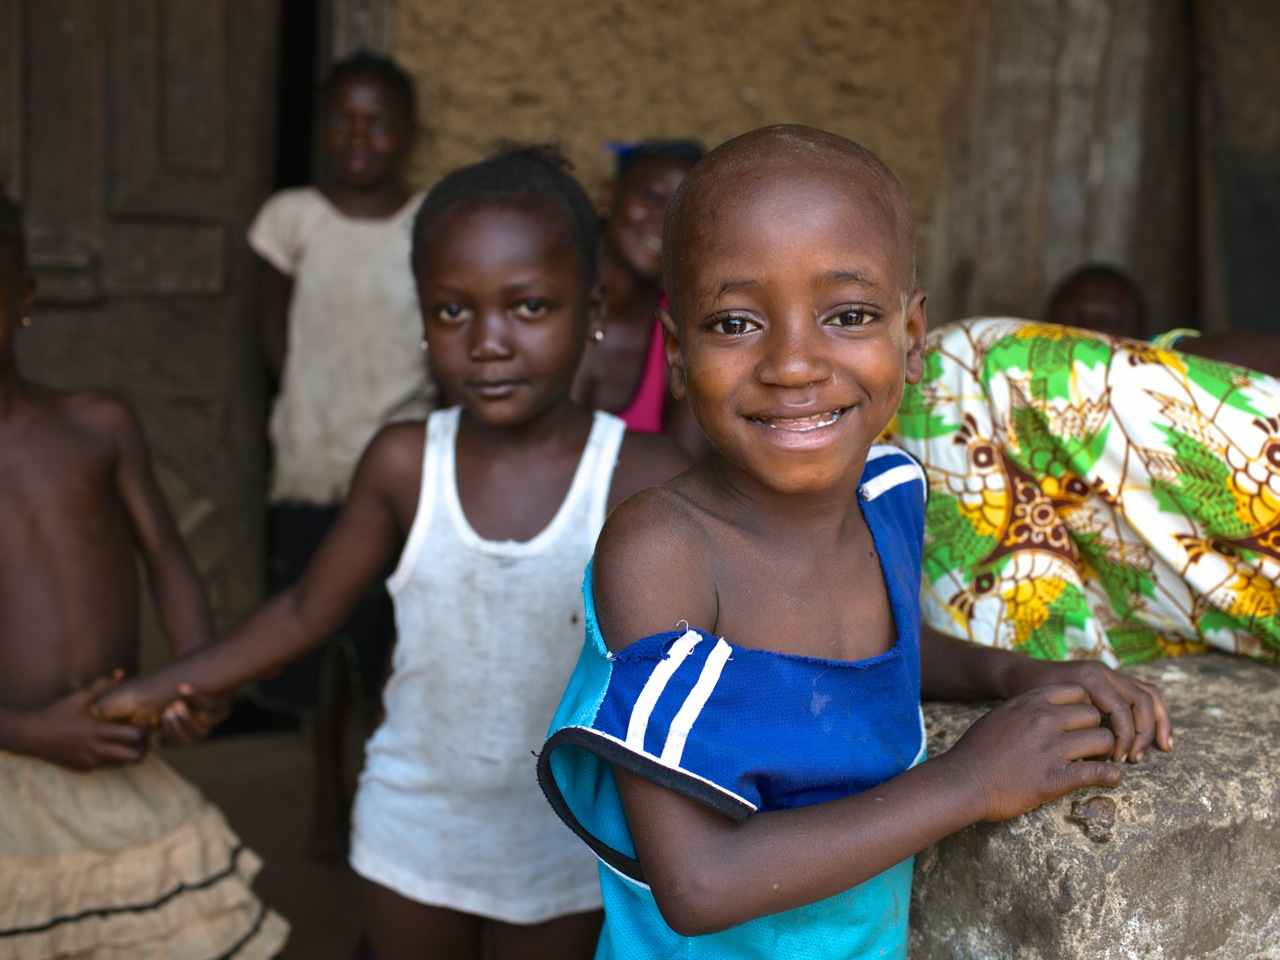 Vandy J., 7, and his 9-year-old sister, Jina J., living in Sierra Leone, are two of only seven members of their immediate family who survived Ebola.  They received care at a UNICEF-sponsored treatment center in July 2014.